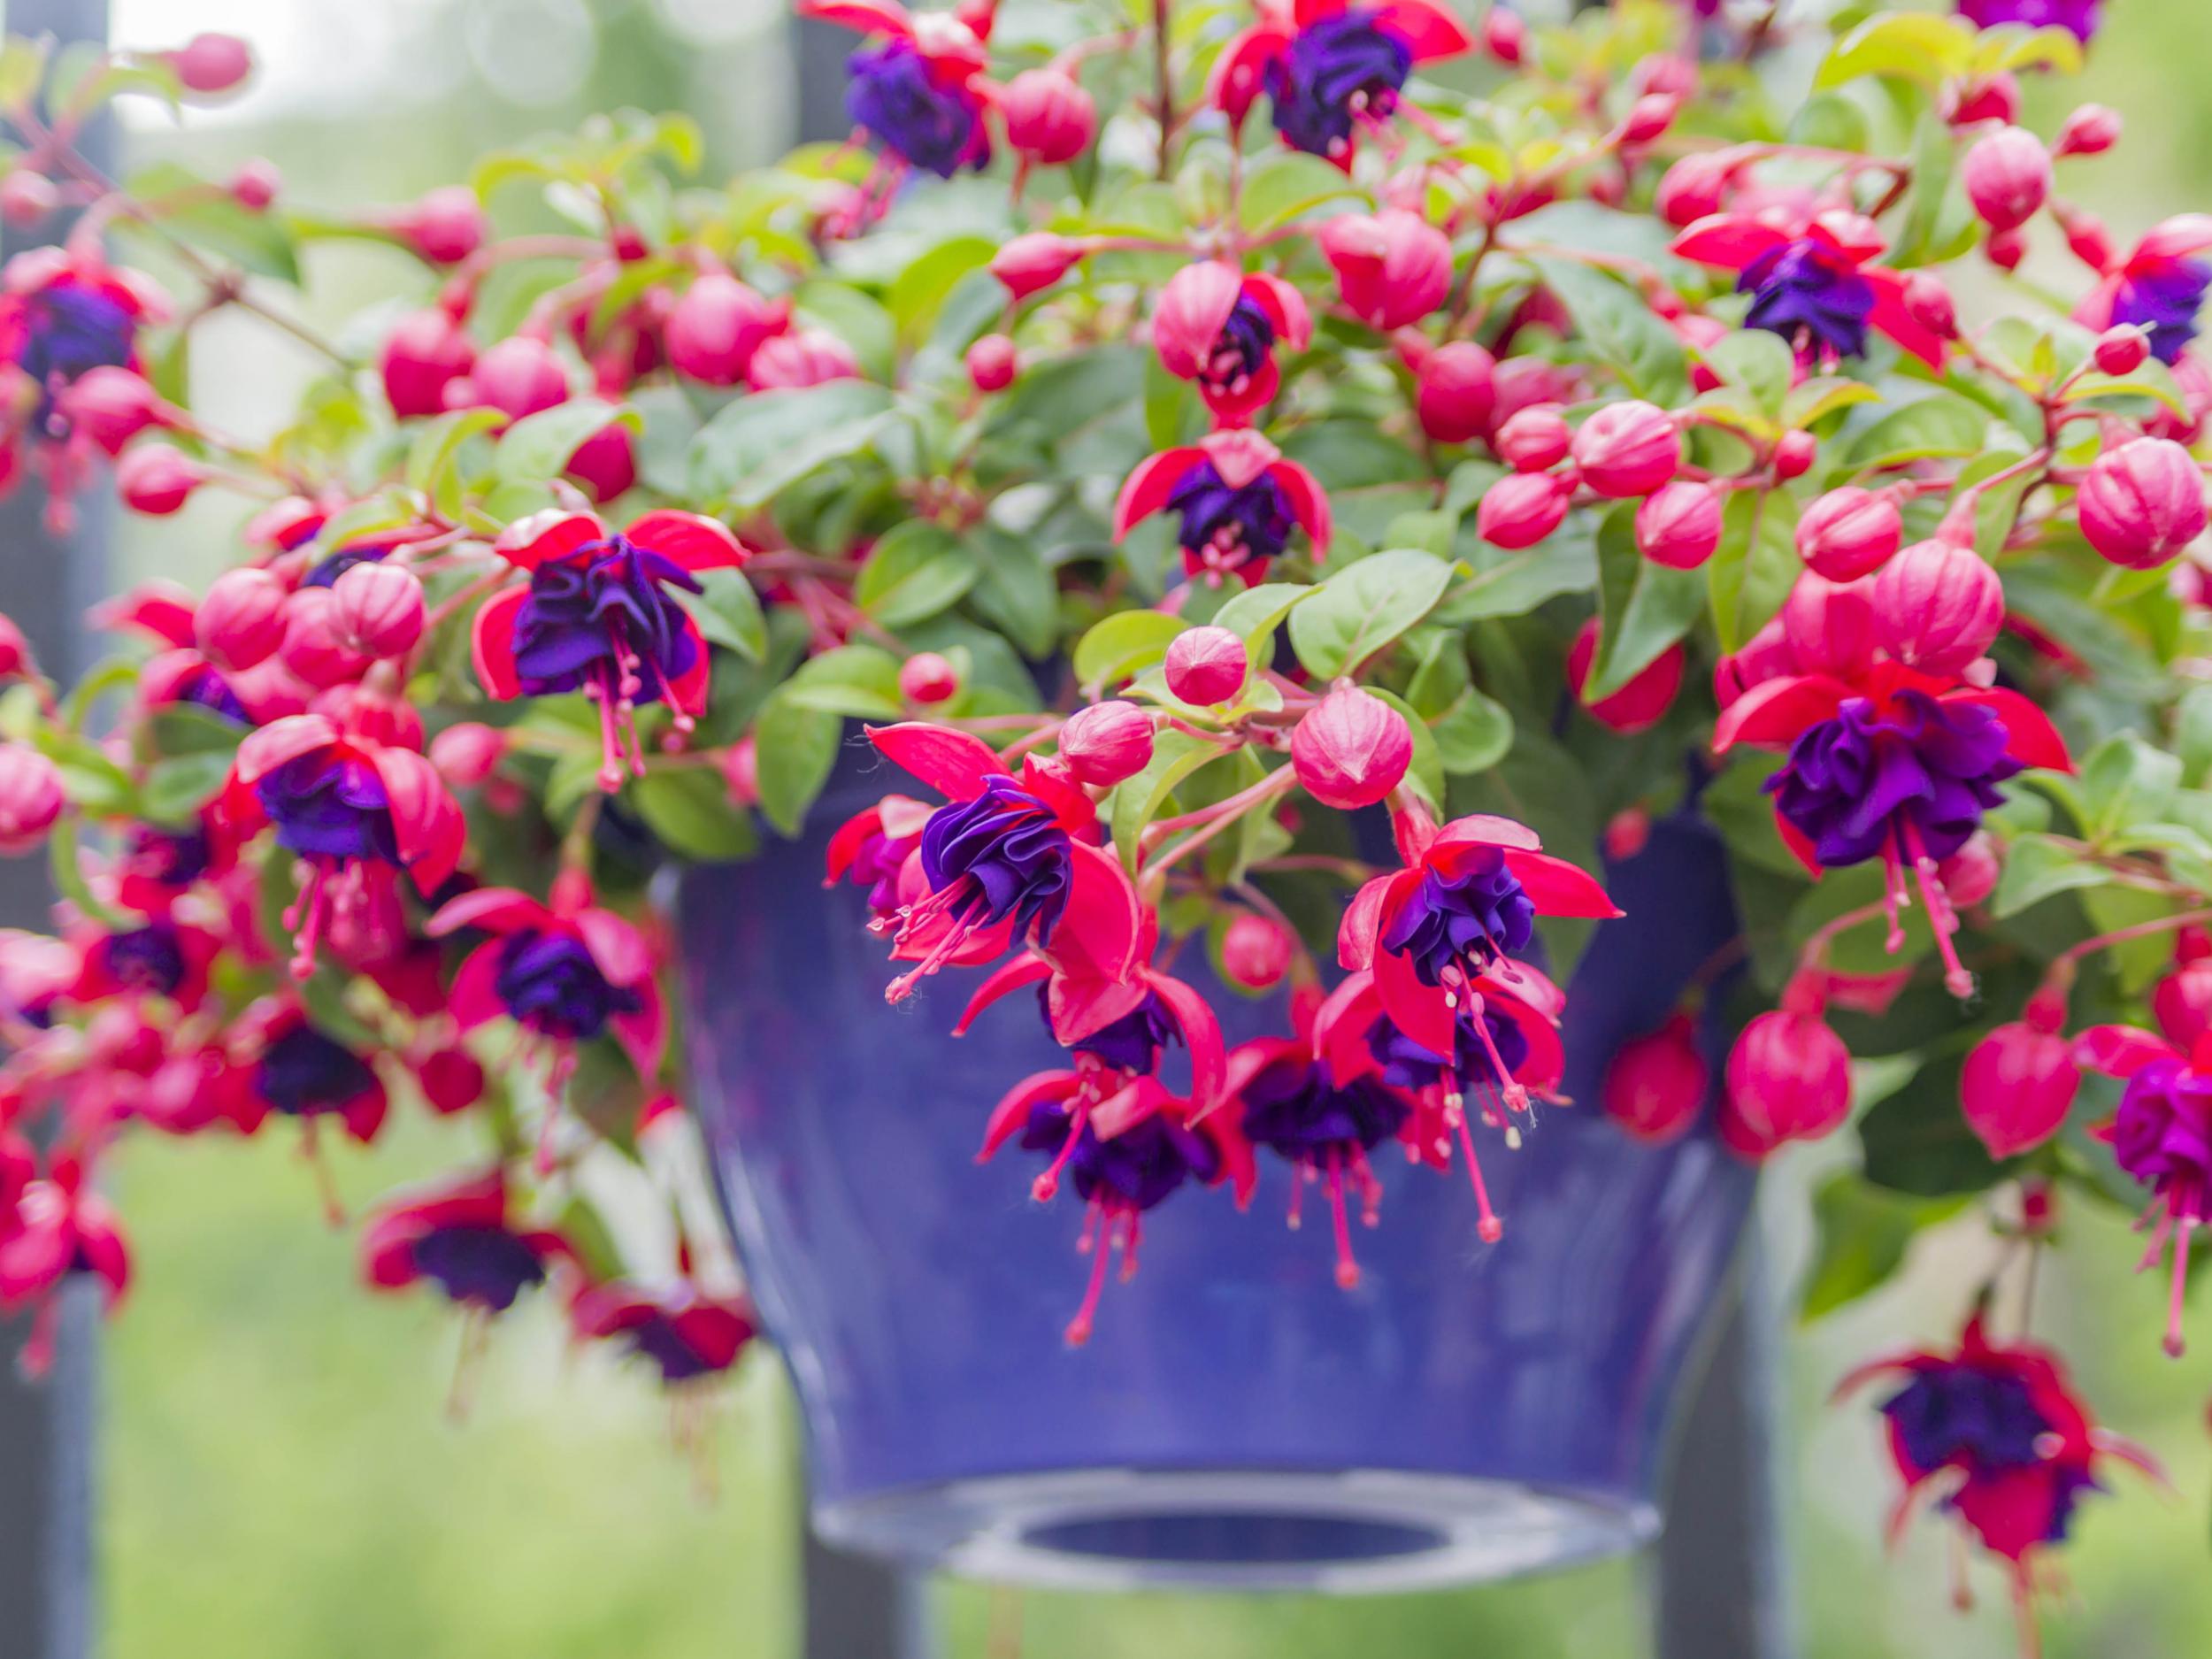 Fuchsias can be planted in both sun and shade